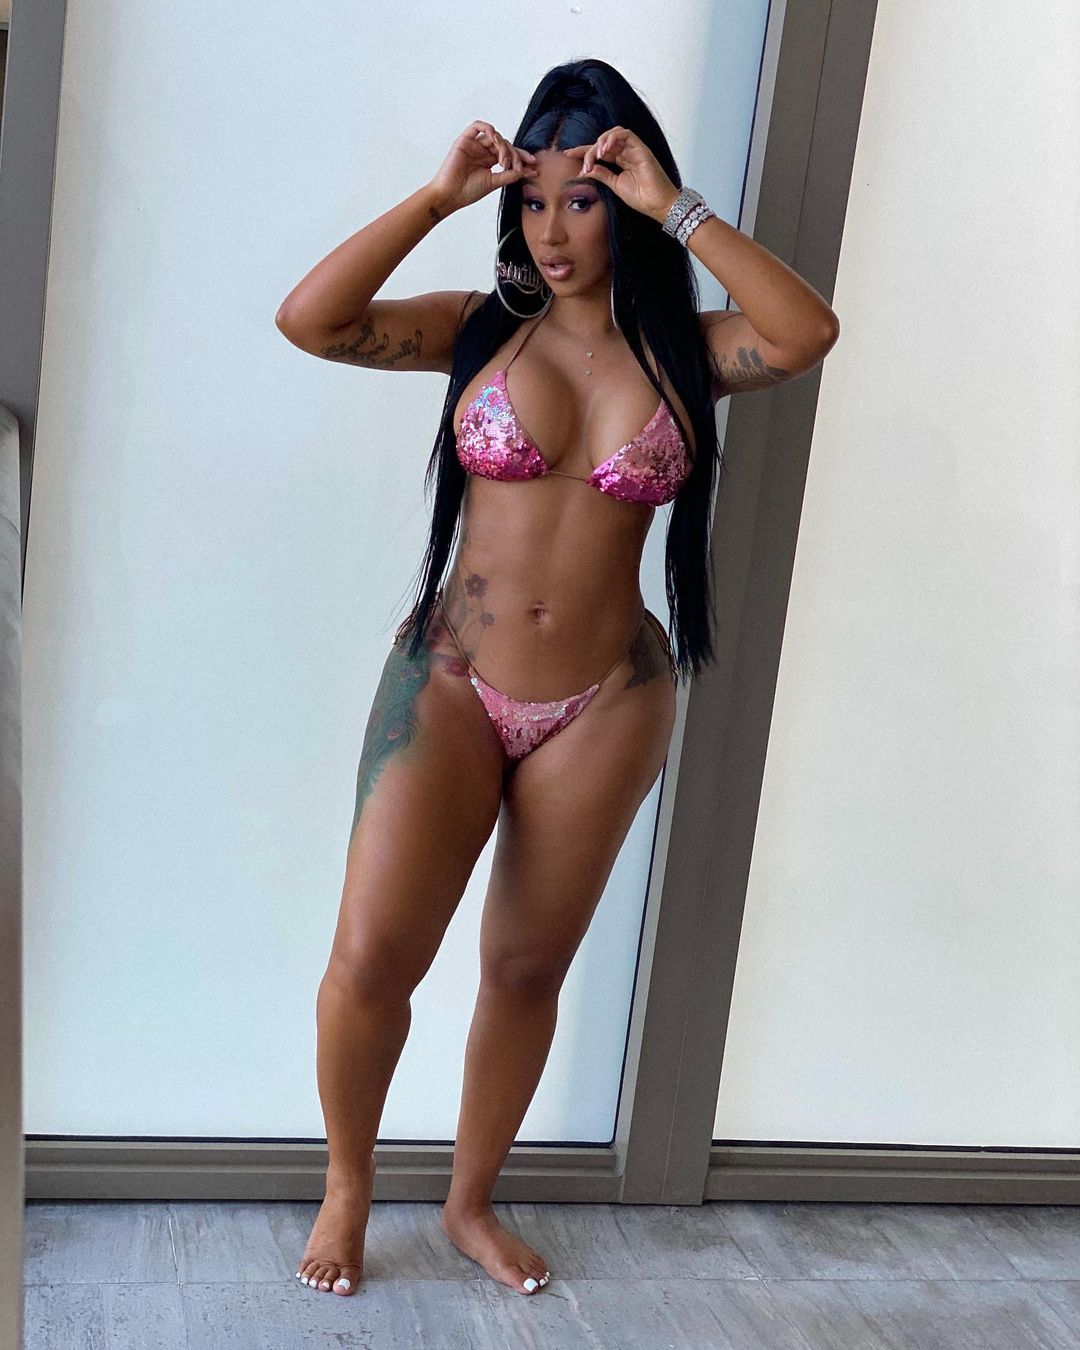 Cardi B is Ready to Go Home! - Photo 1